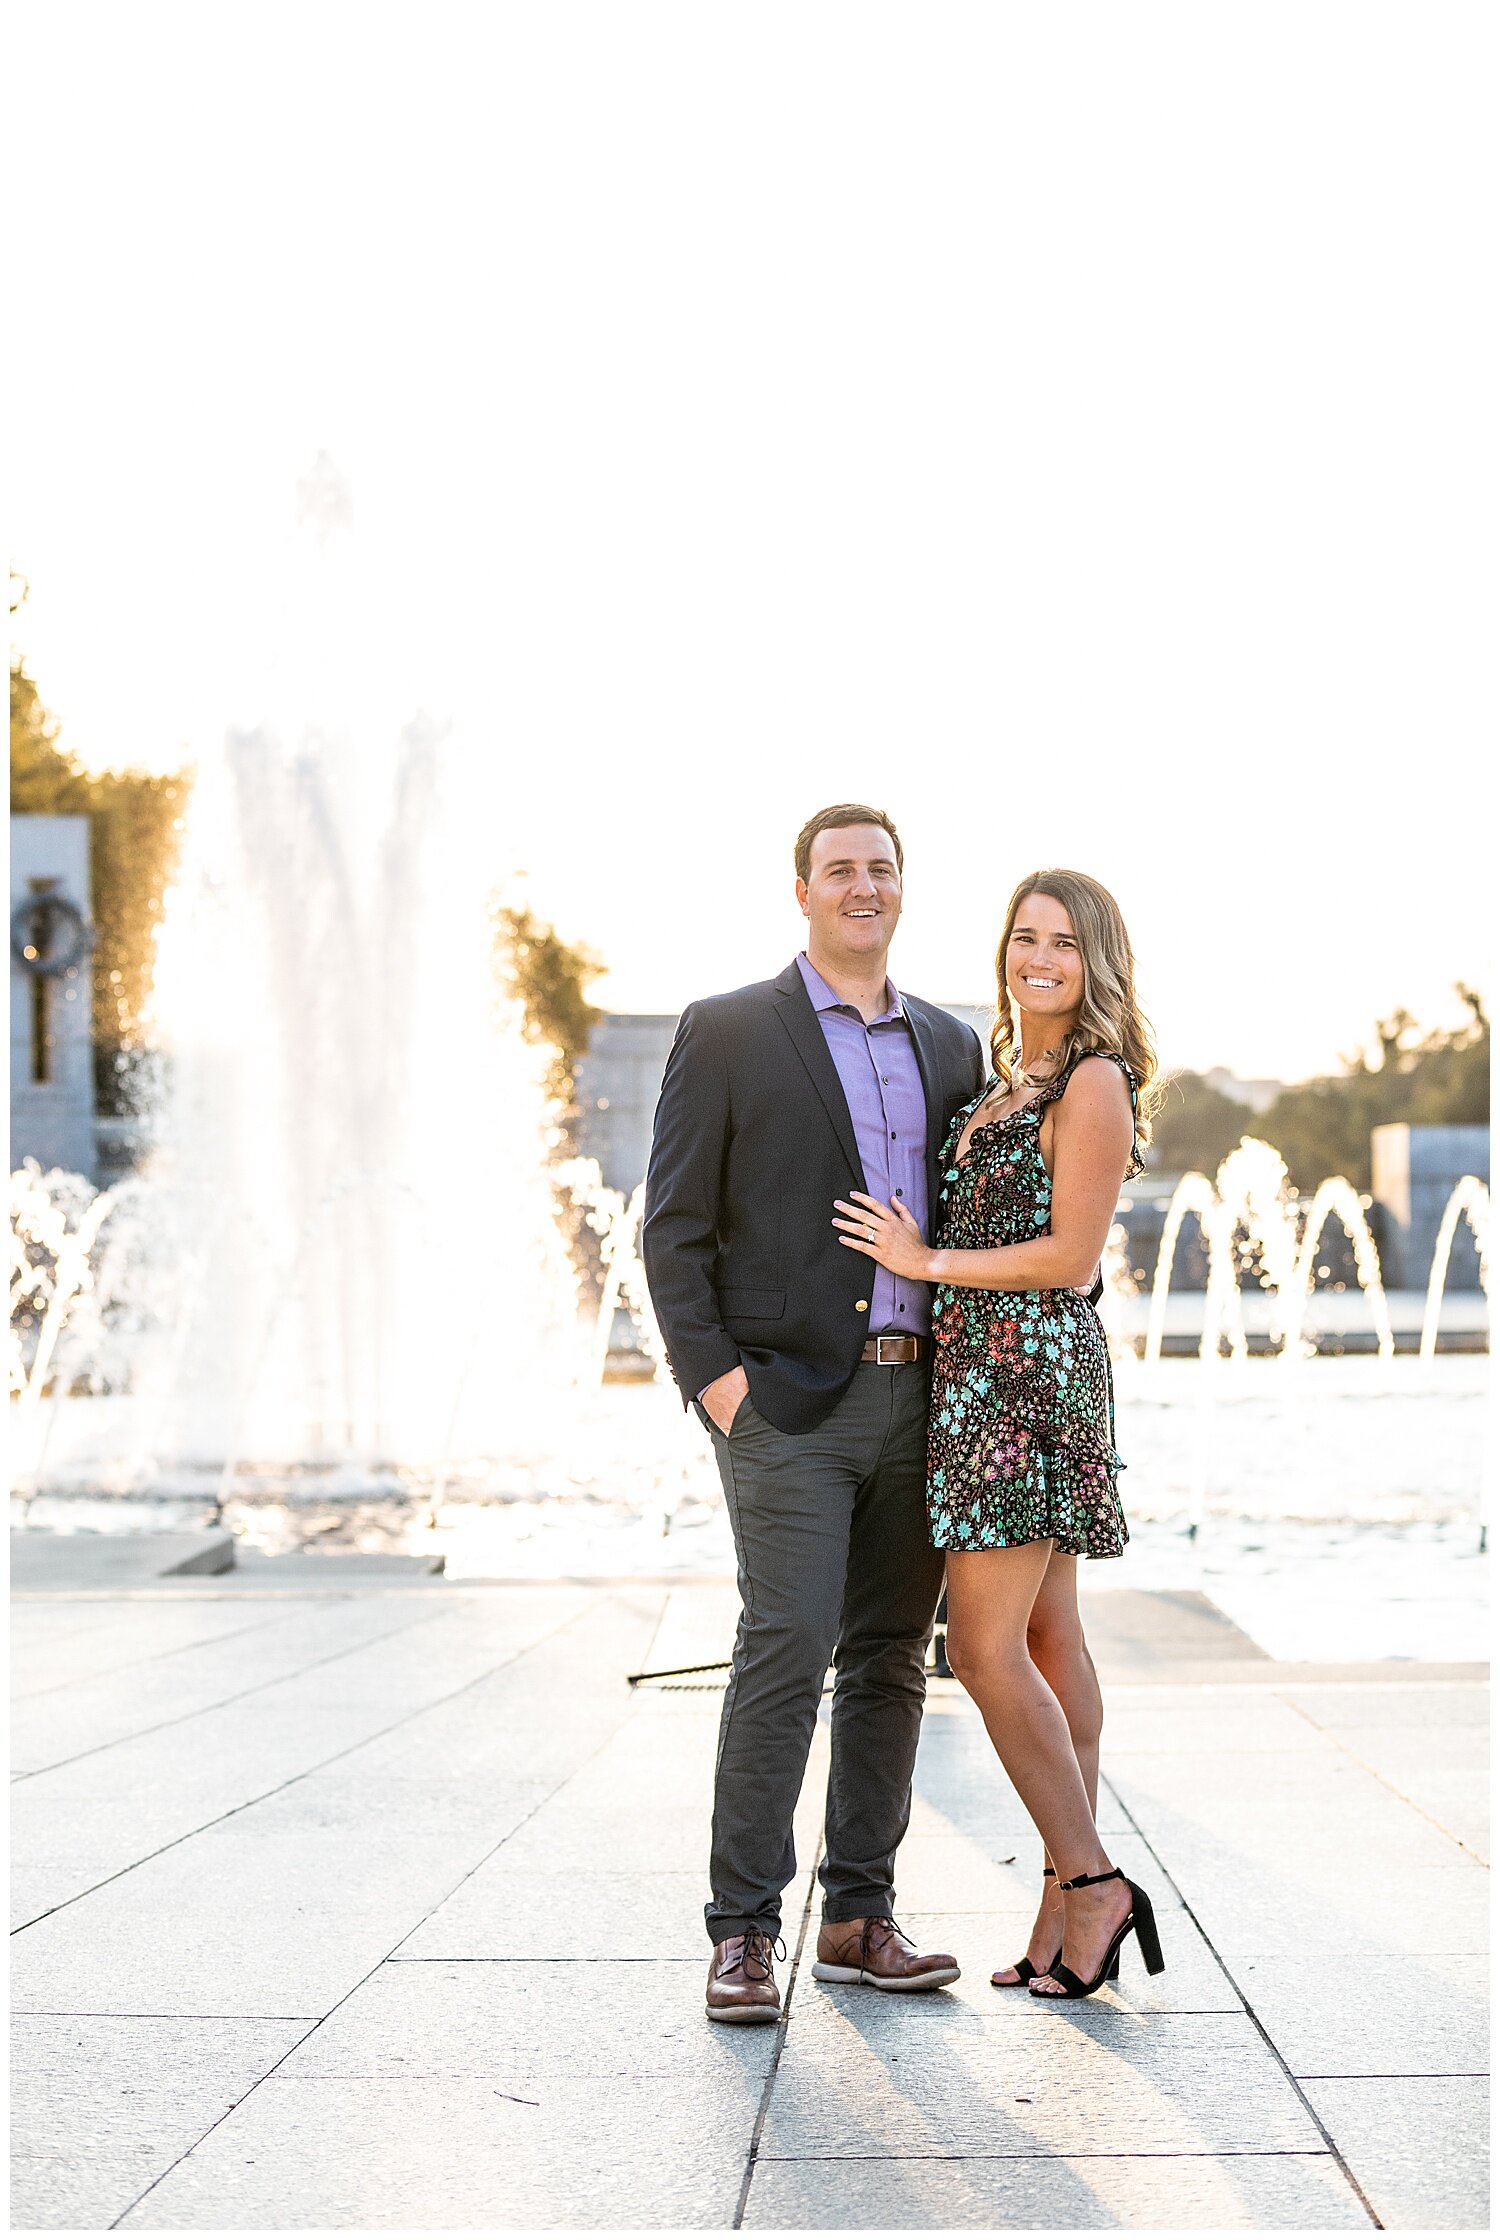 Haylie Chris National Mall Engagement Session 2020 Living Radiant Photography_0017.jpg